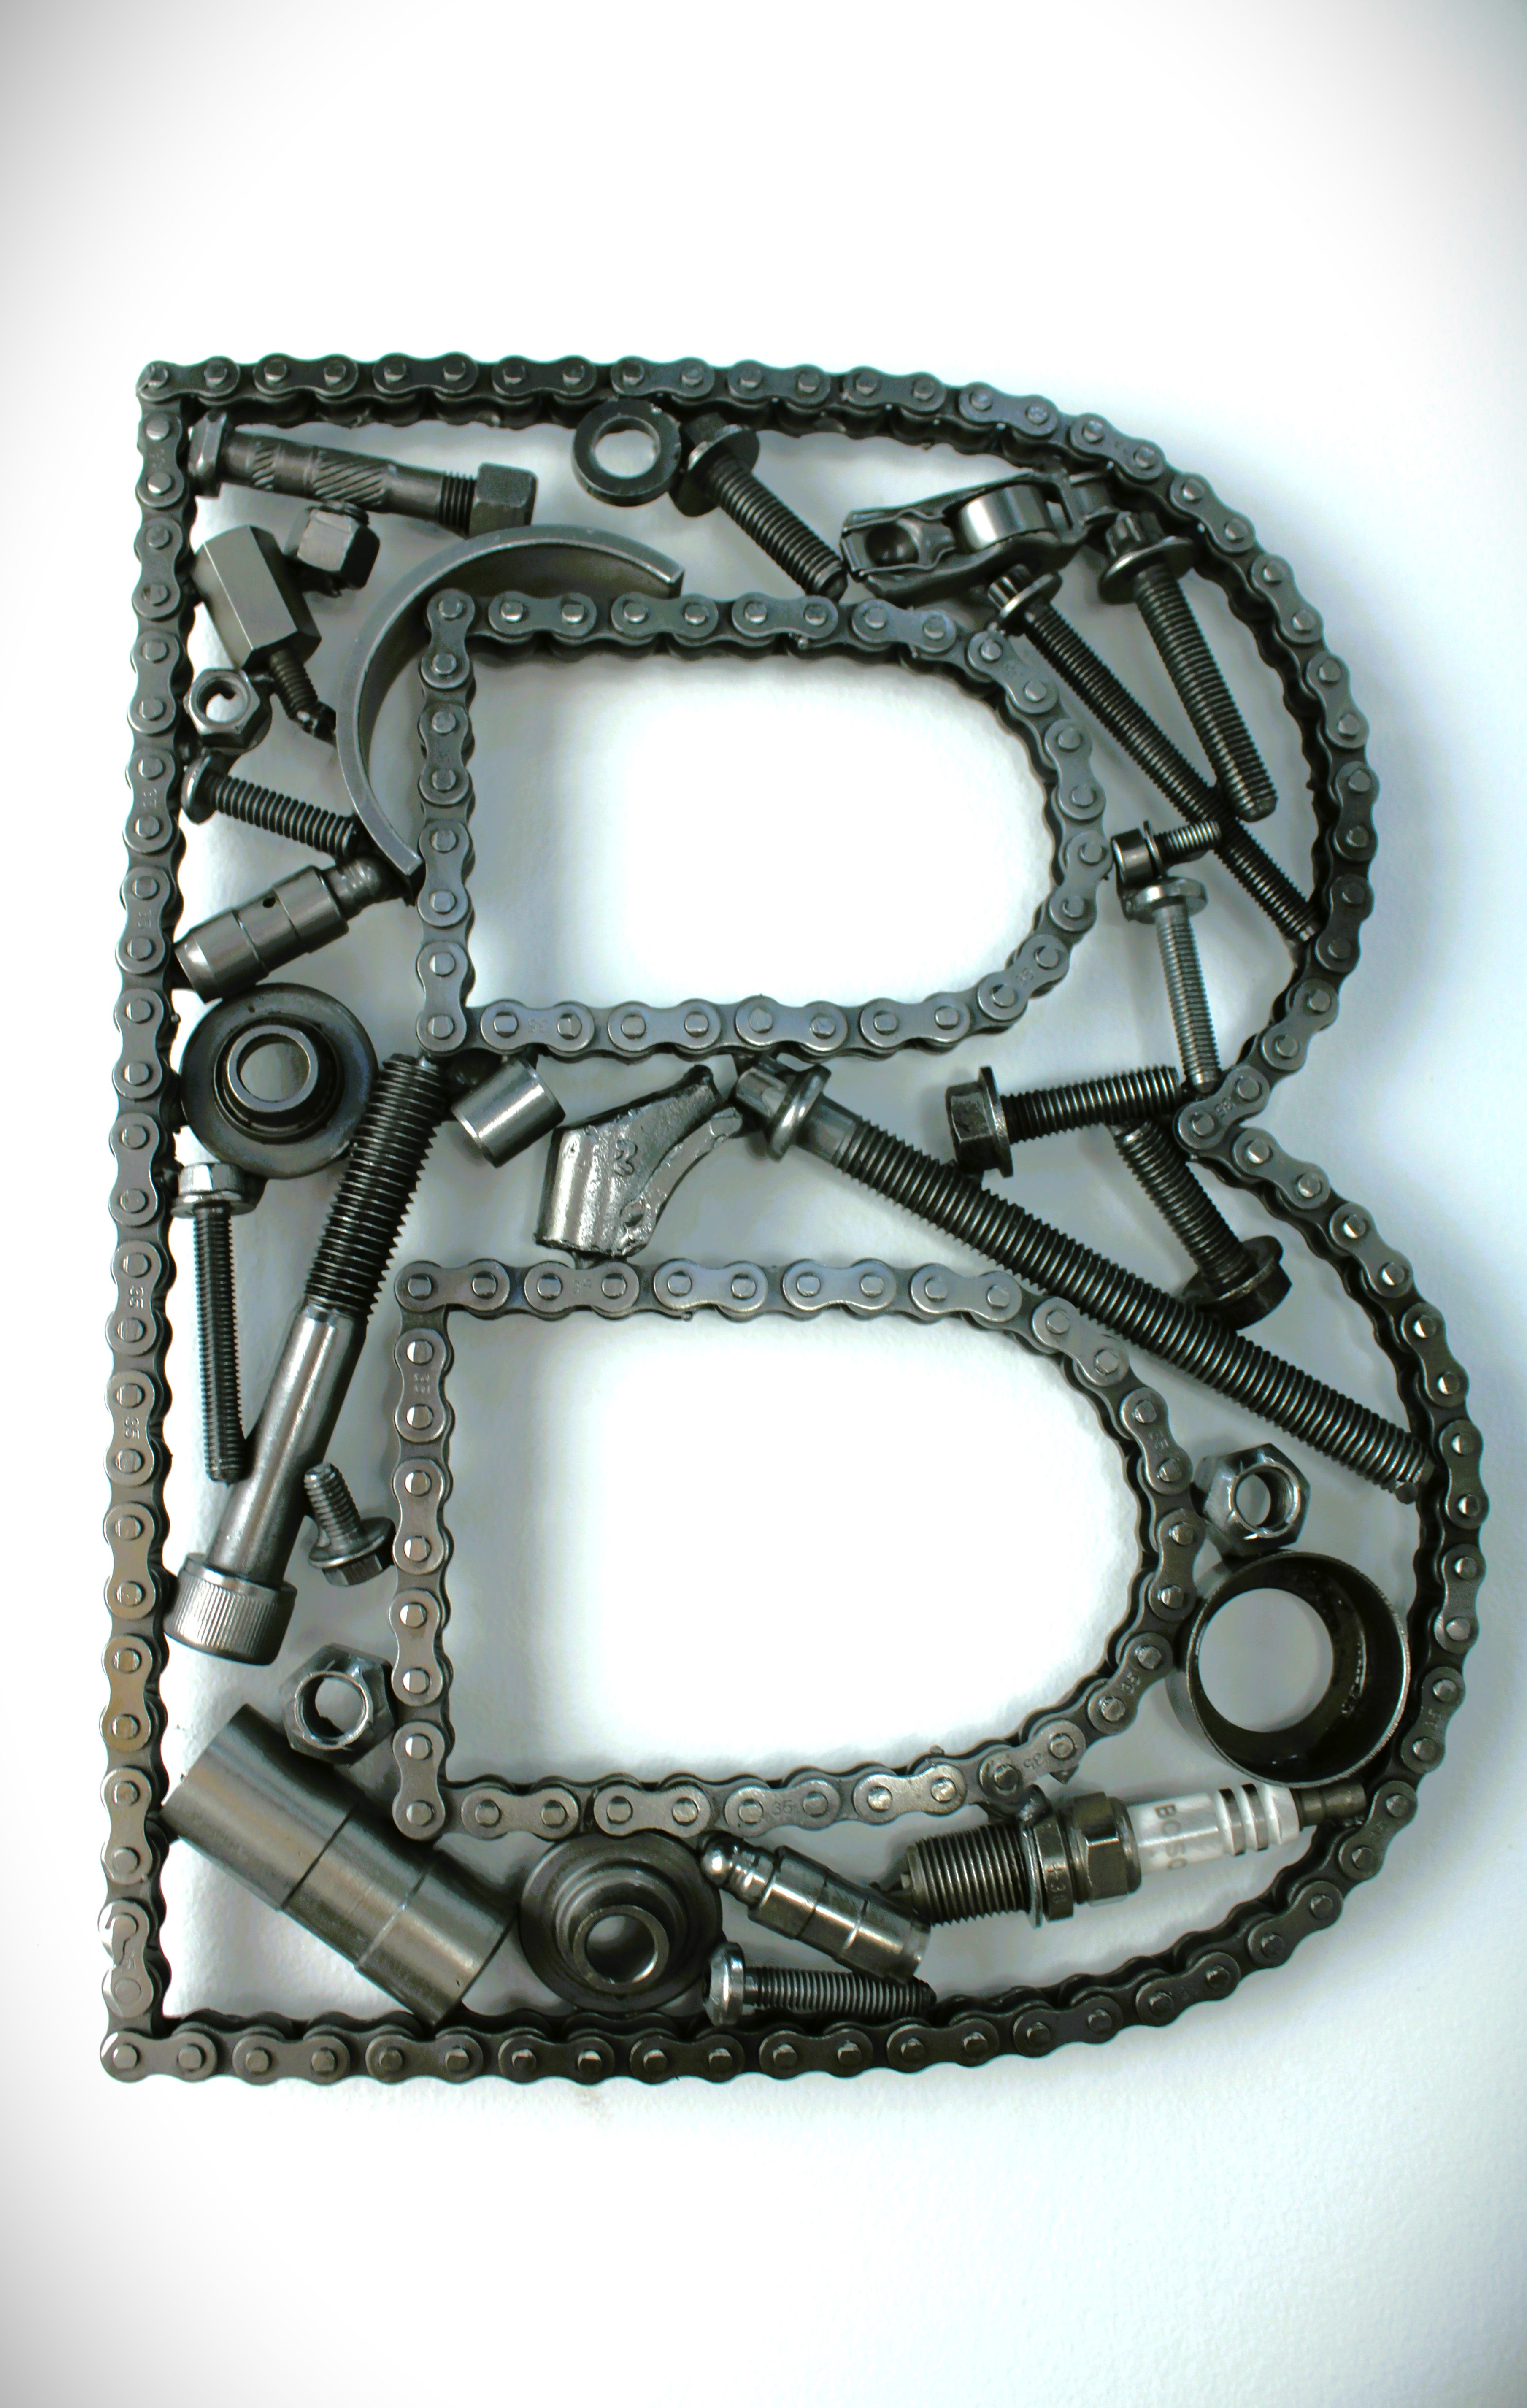 A letter B made out of real car parts, outlined with a timing chain.